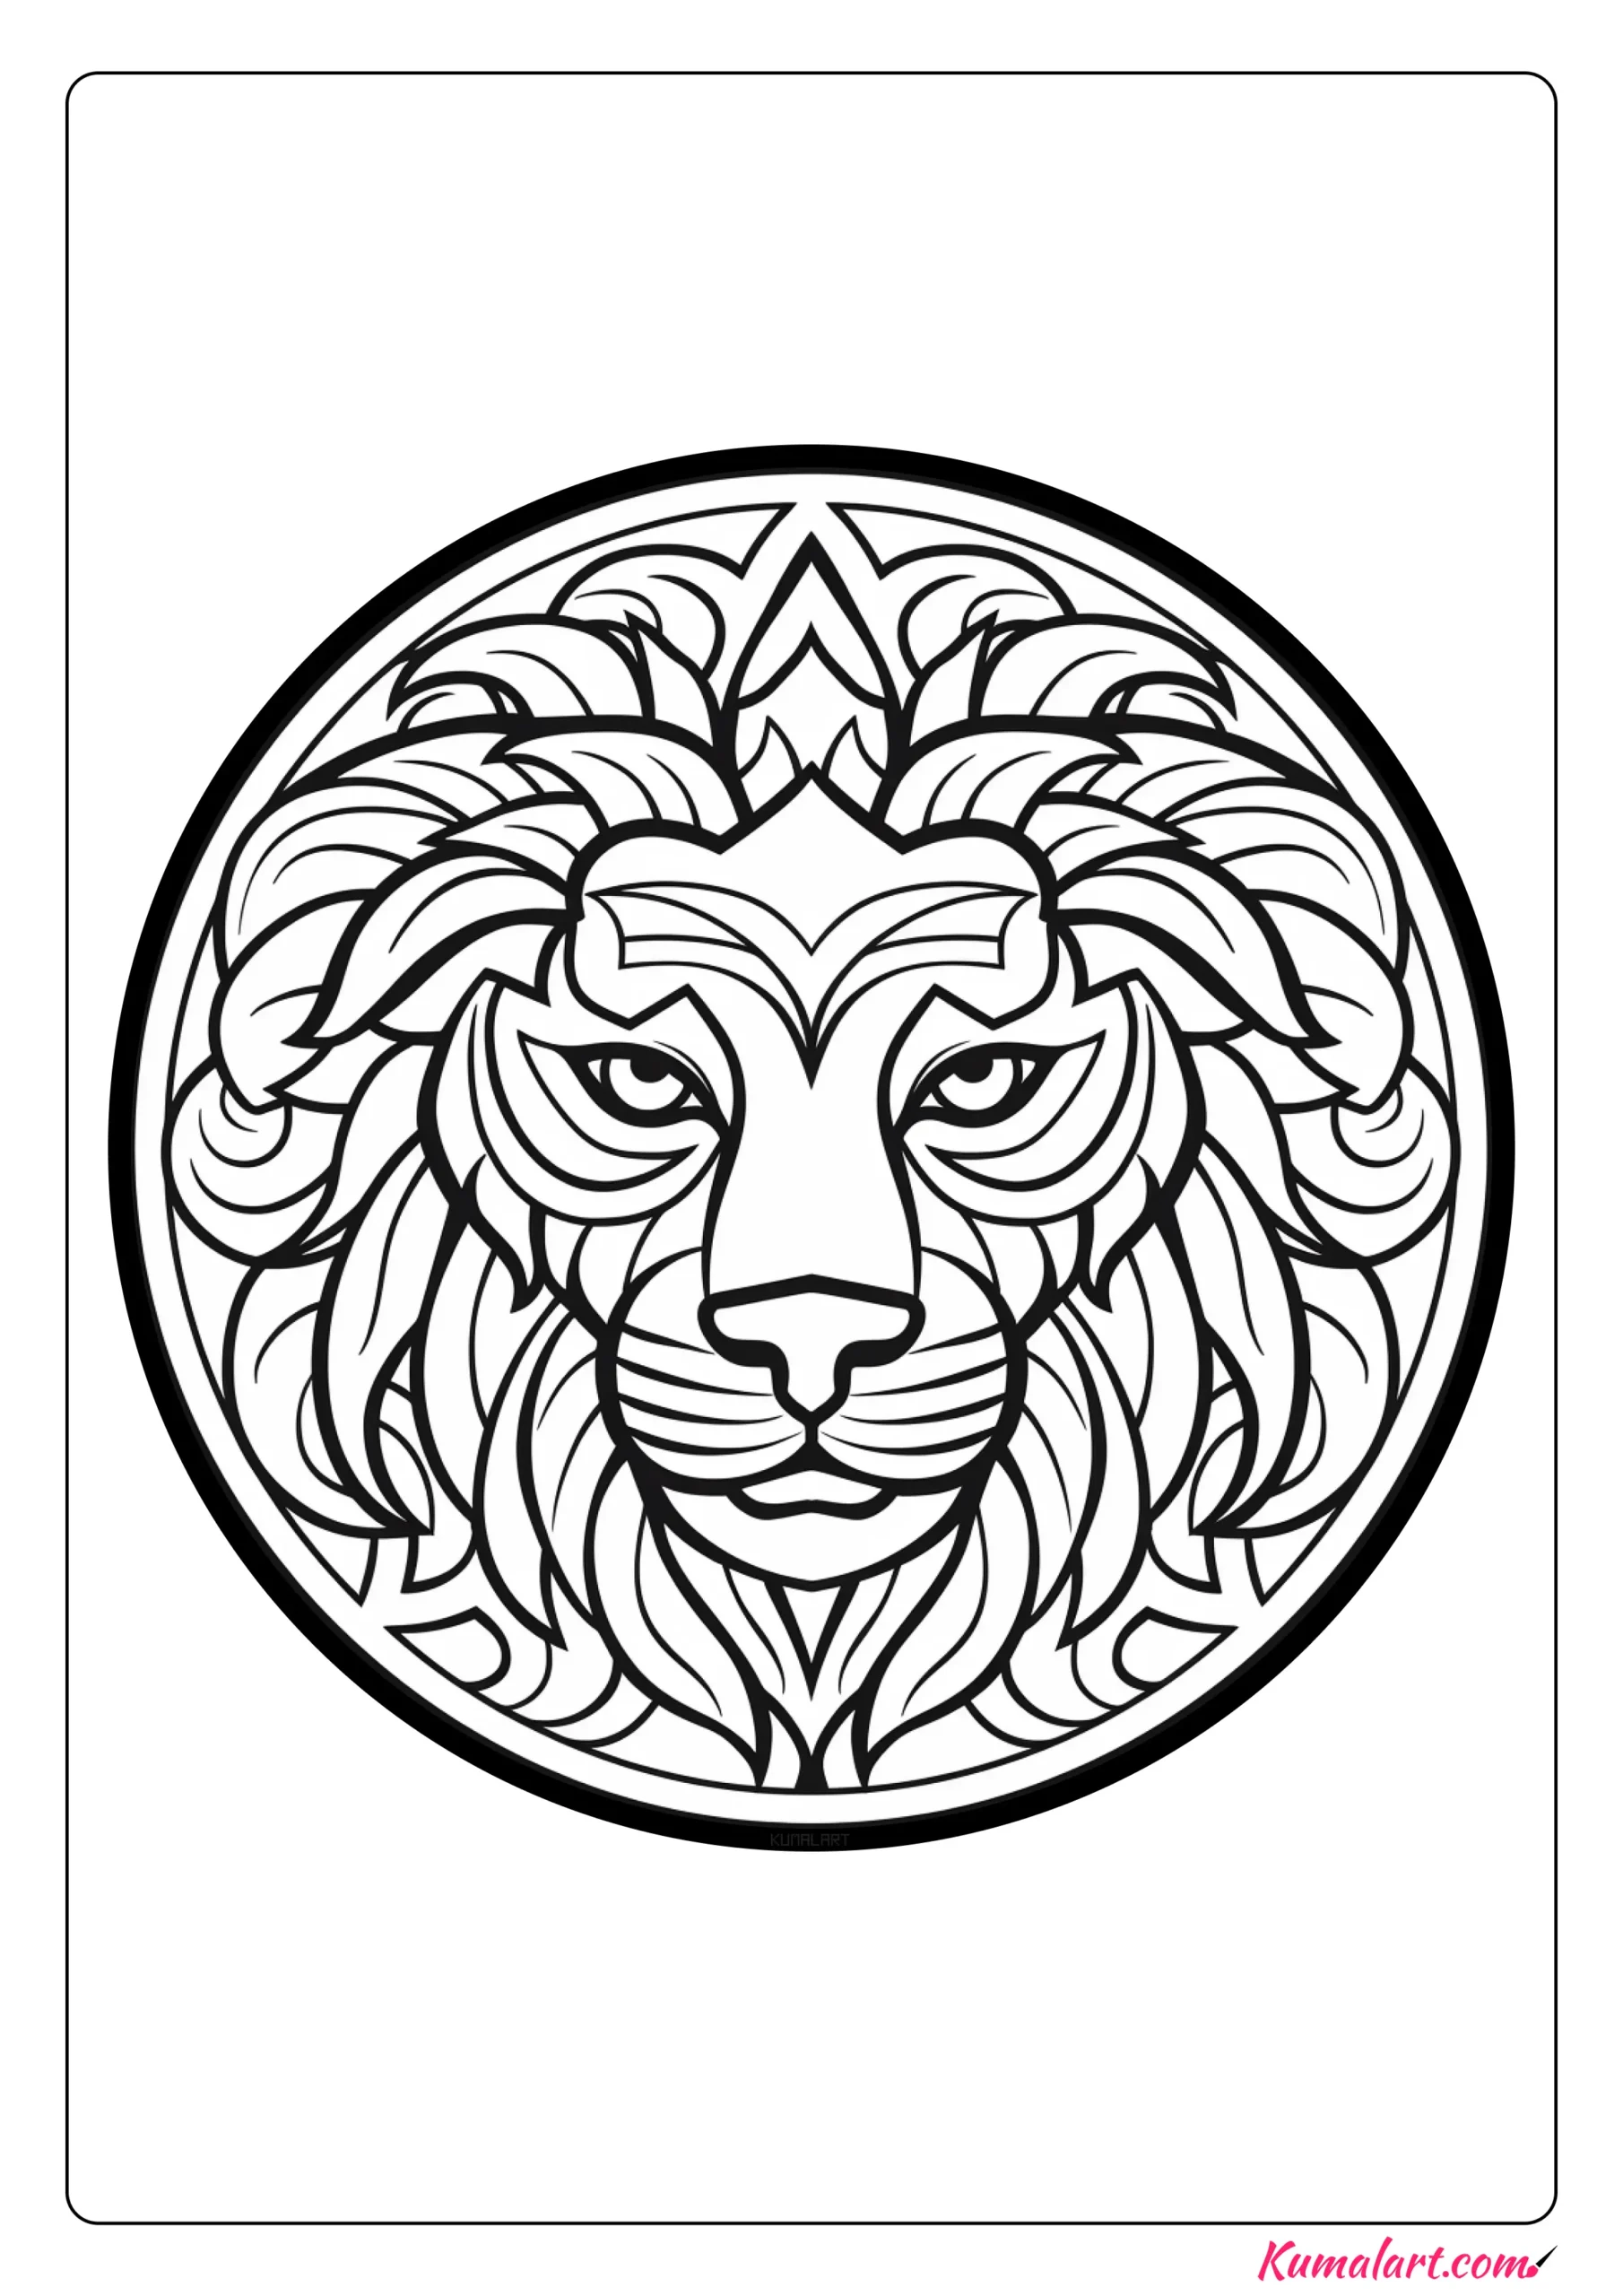 Anna the Lion Mandala Coloring Page